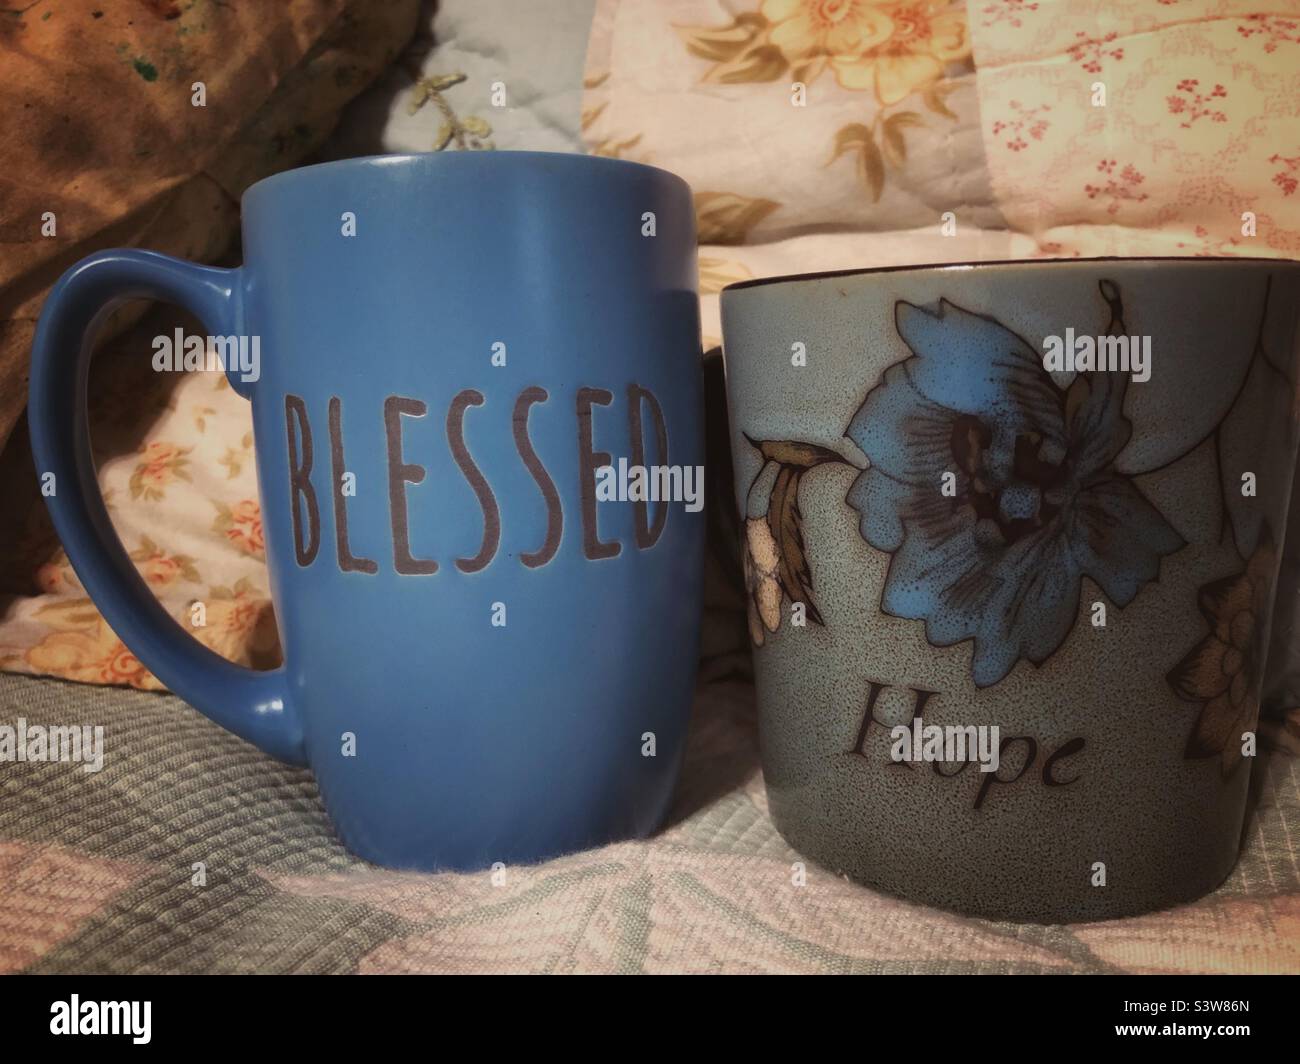 Two blue coffee mugs spelling out “Blessed” and “Hope” Stock Photo